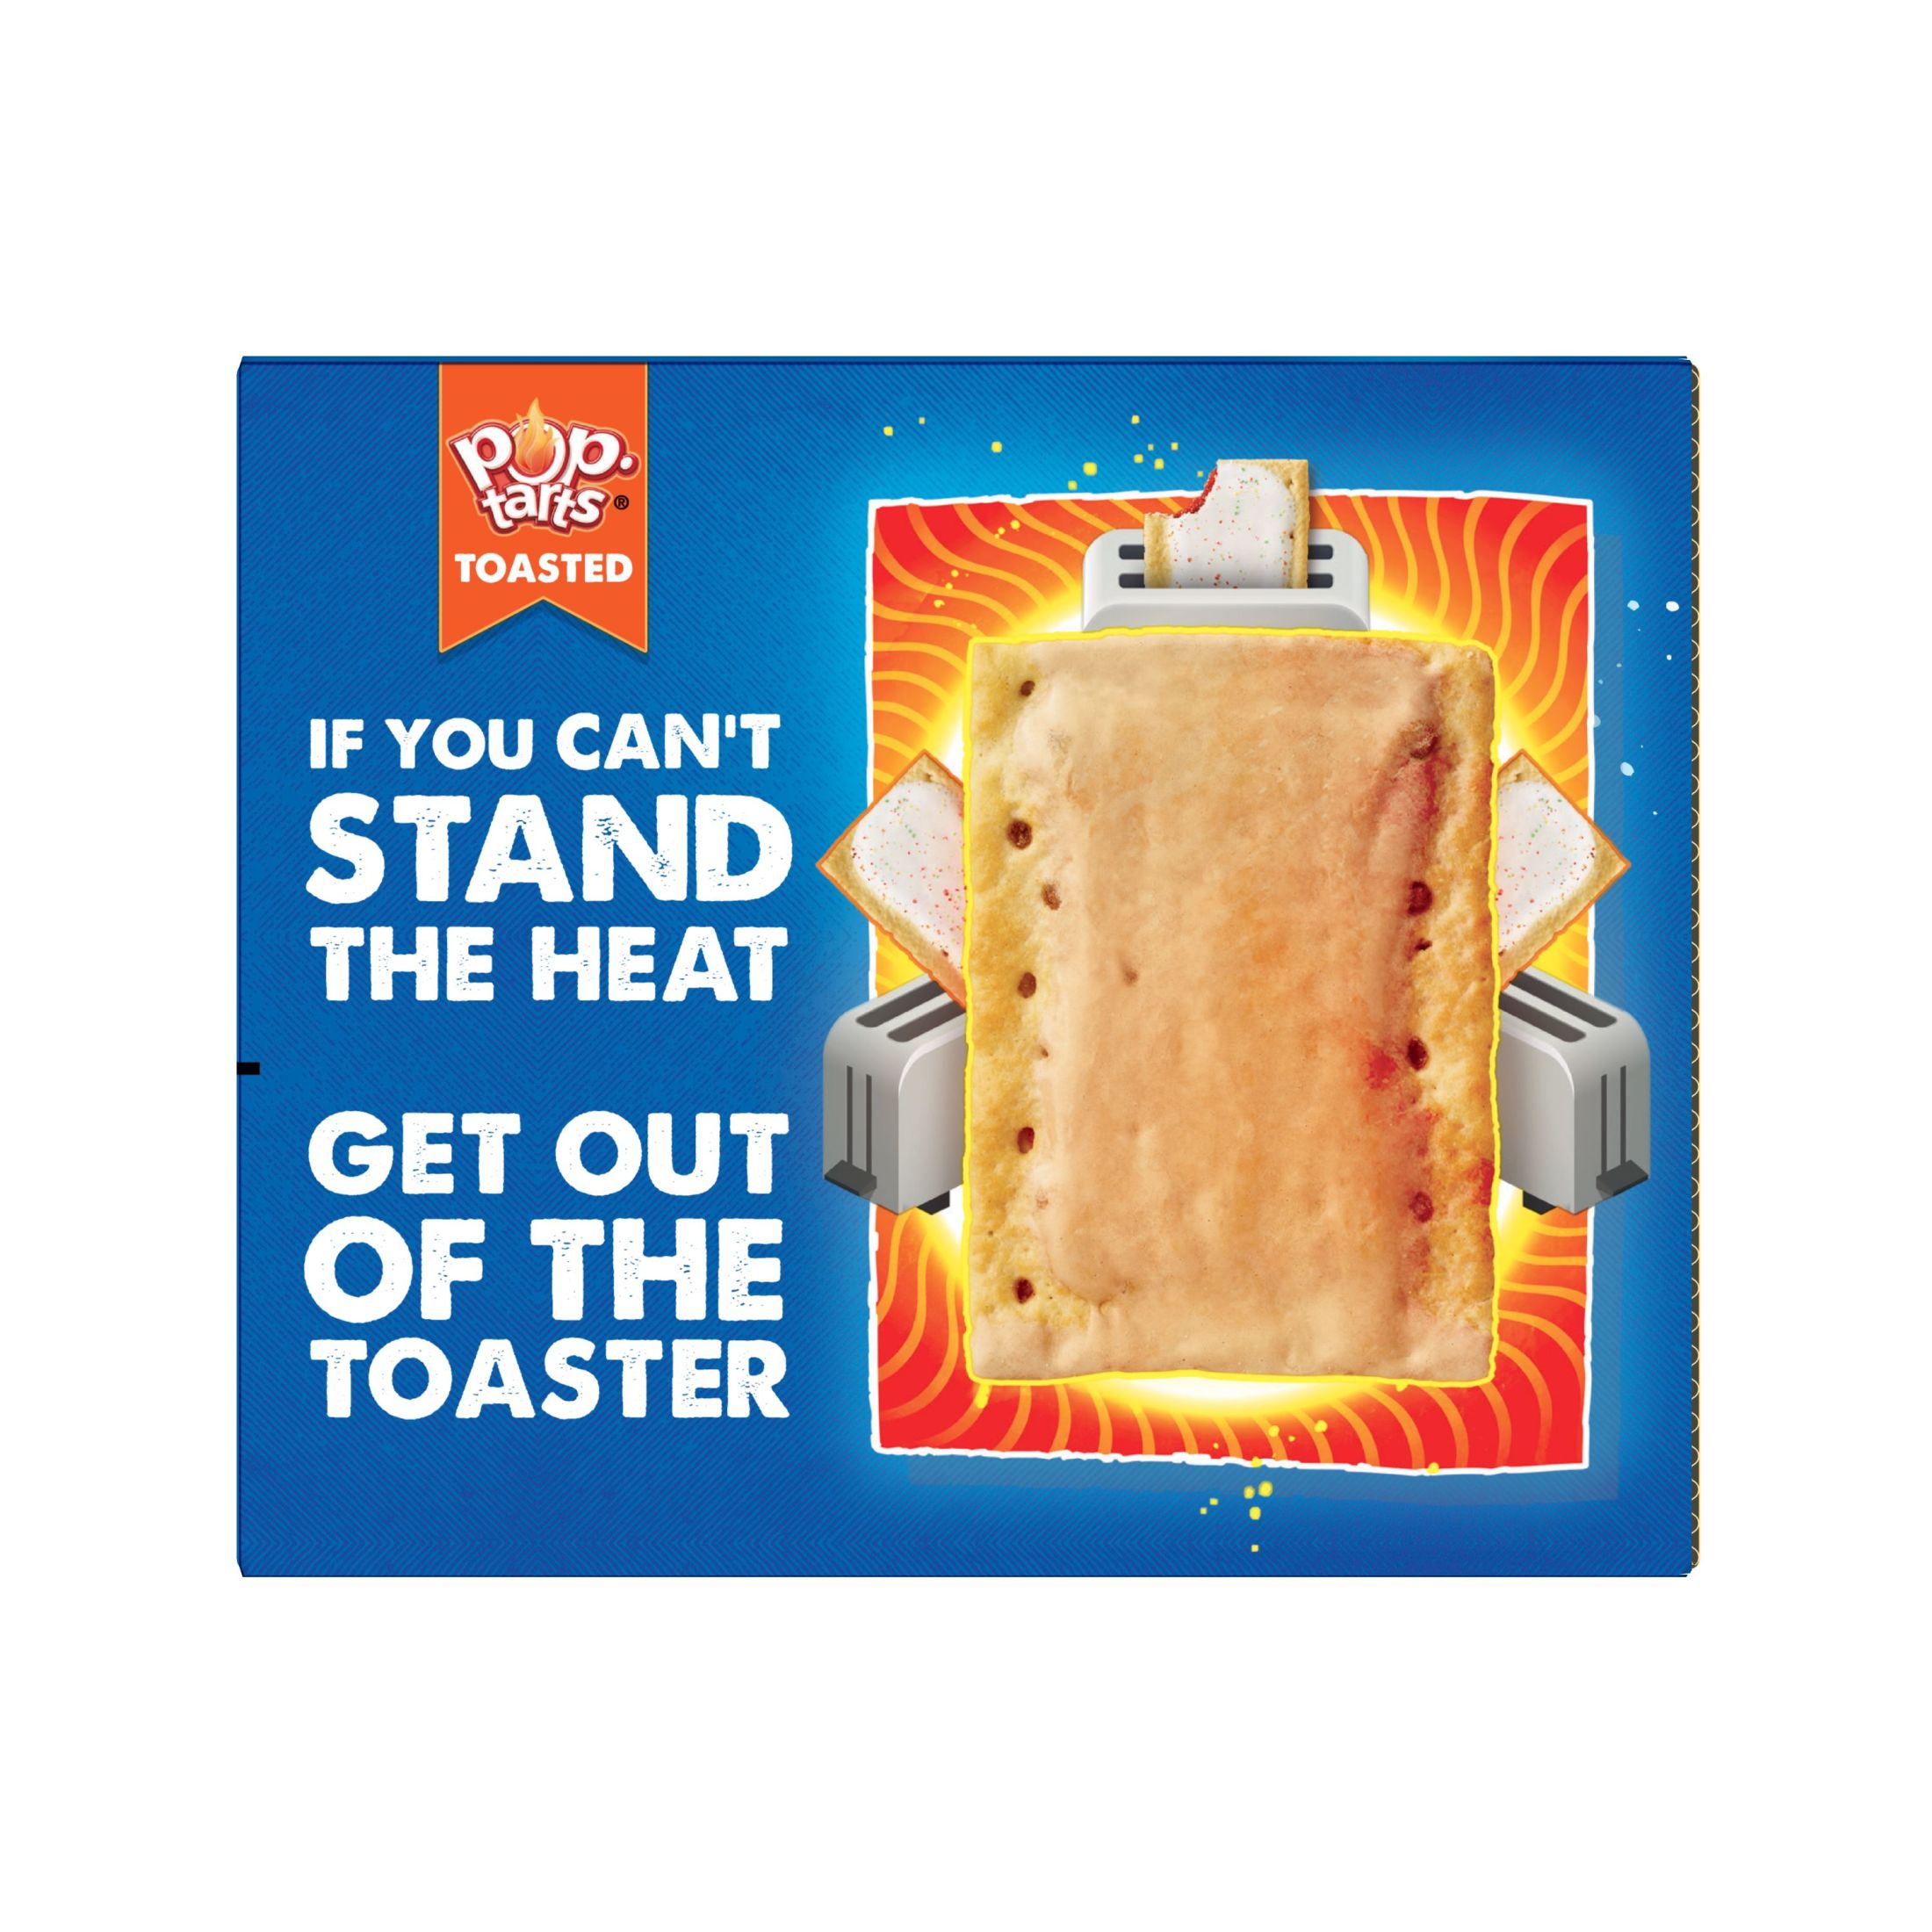 Pop-Tarts Drizzle Chocolate Chip Breakfast Toaster Pastries, 29.3 oz, 16 Count - image 5 of 9